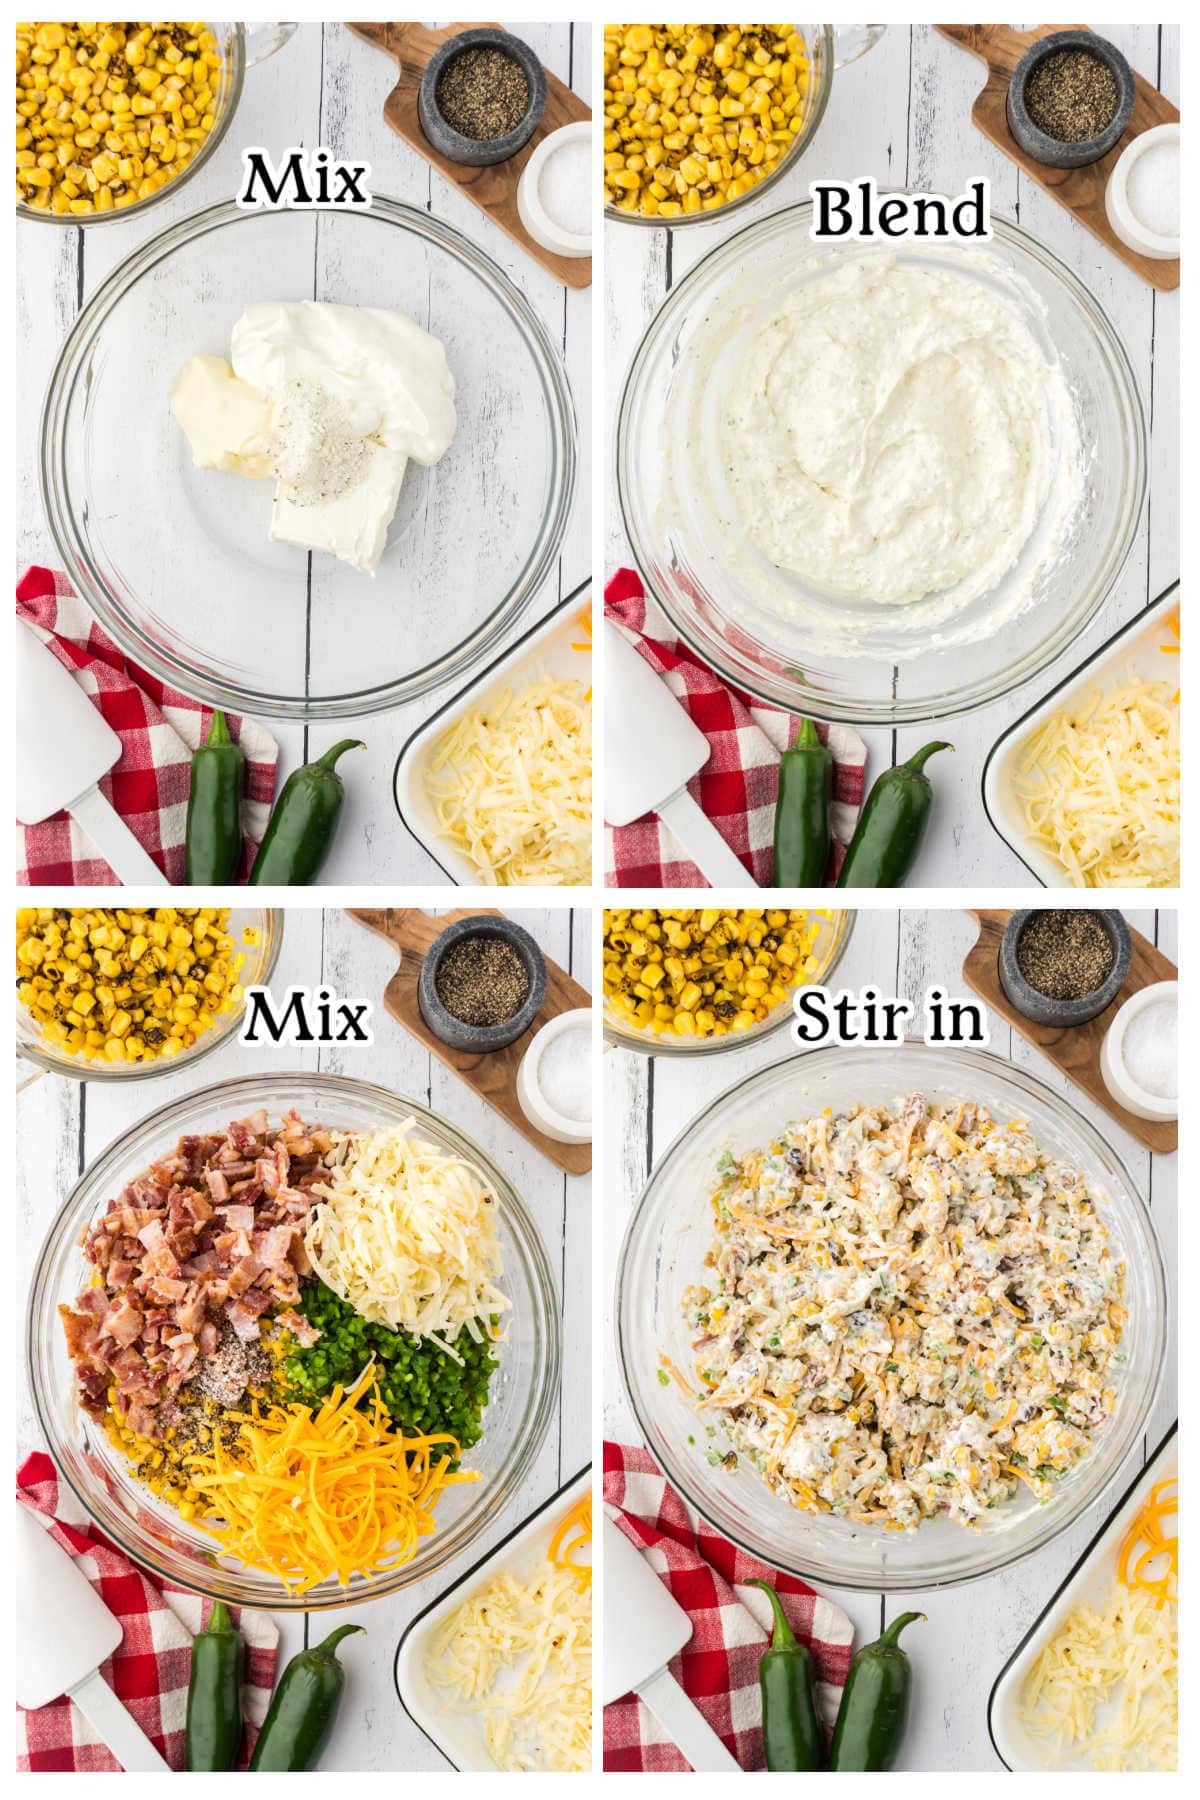 Four overhead images with text overlay depicting the main recipe instructions.